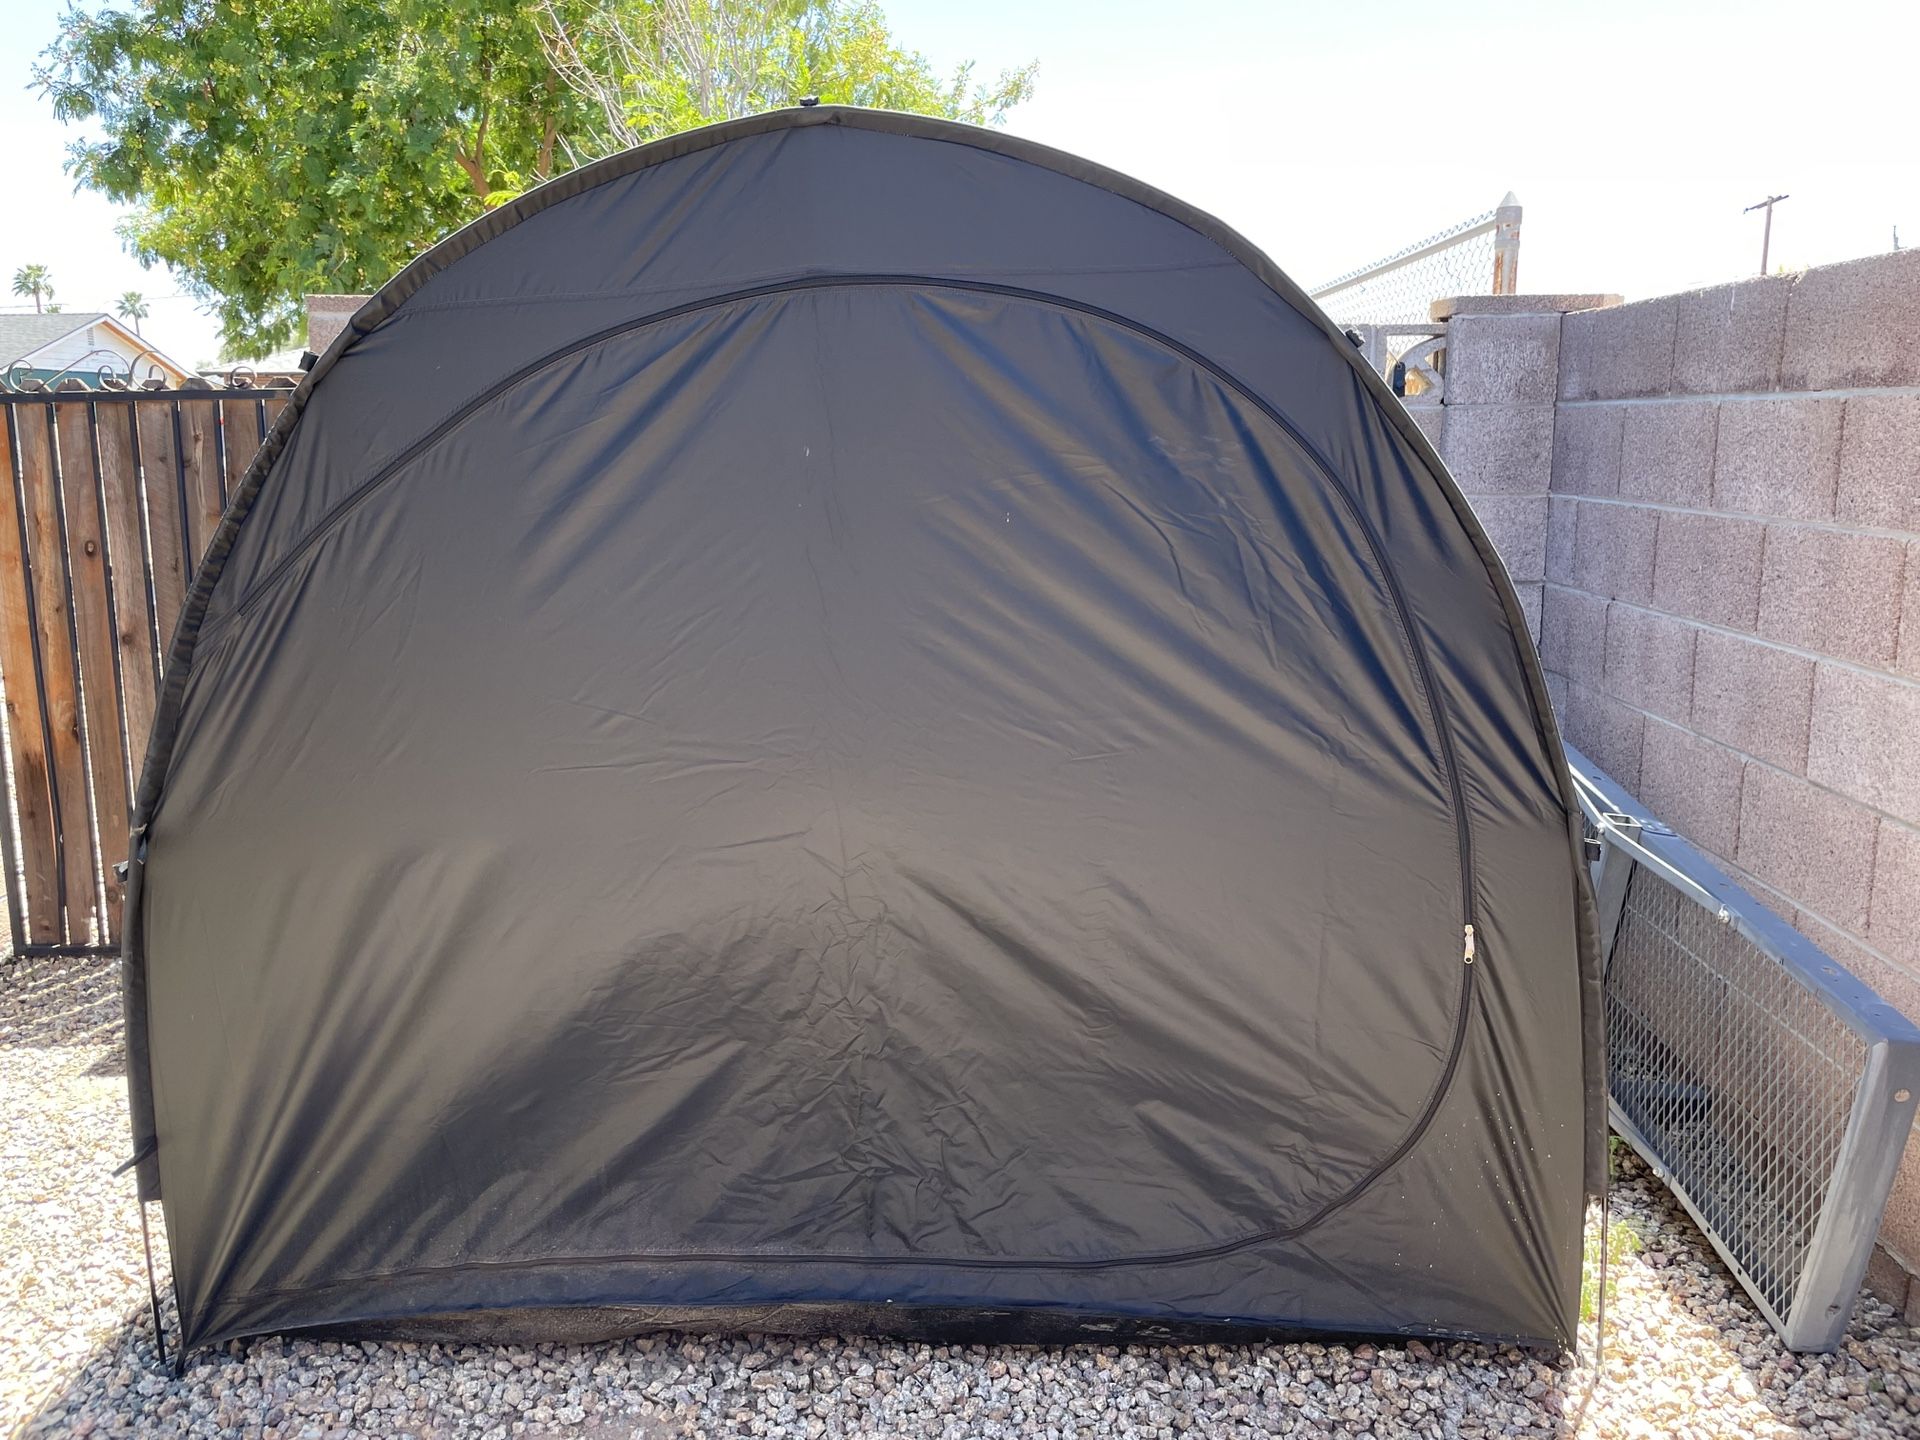 REVISED LISTING - H&ZT Bike Storage Shed Tent - 6.5' X 5.3'X 5.3' Outdoor Bike Cover - $50